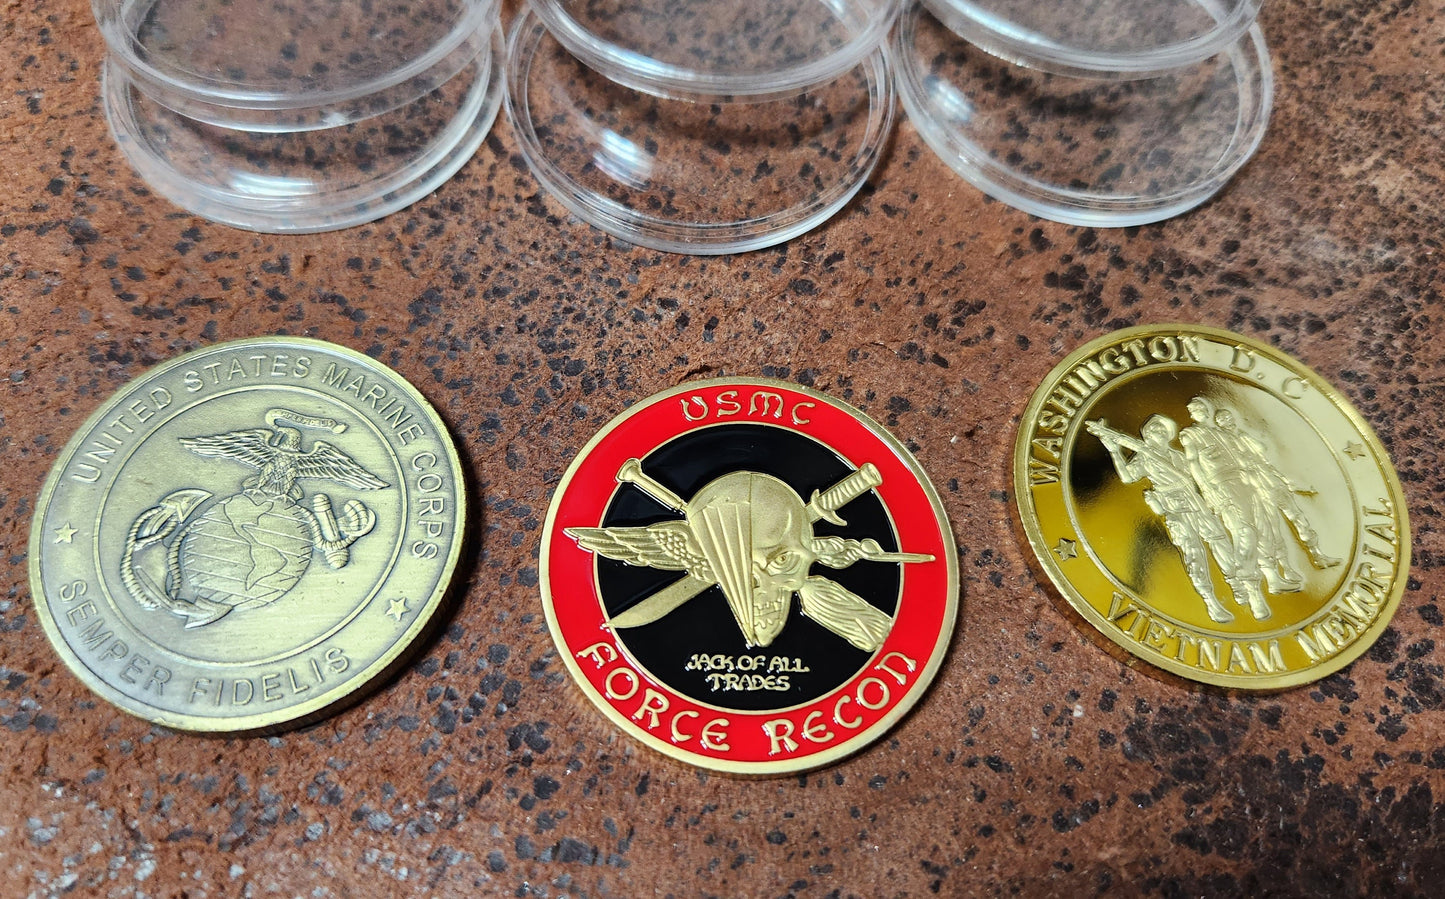 Military and first responder challenge coin, from USMC, USAF, USN, and all other branches